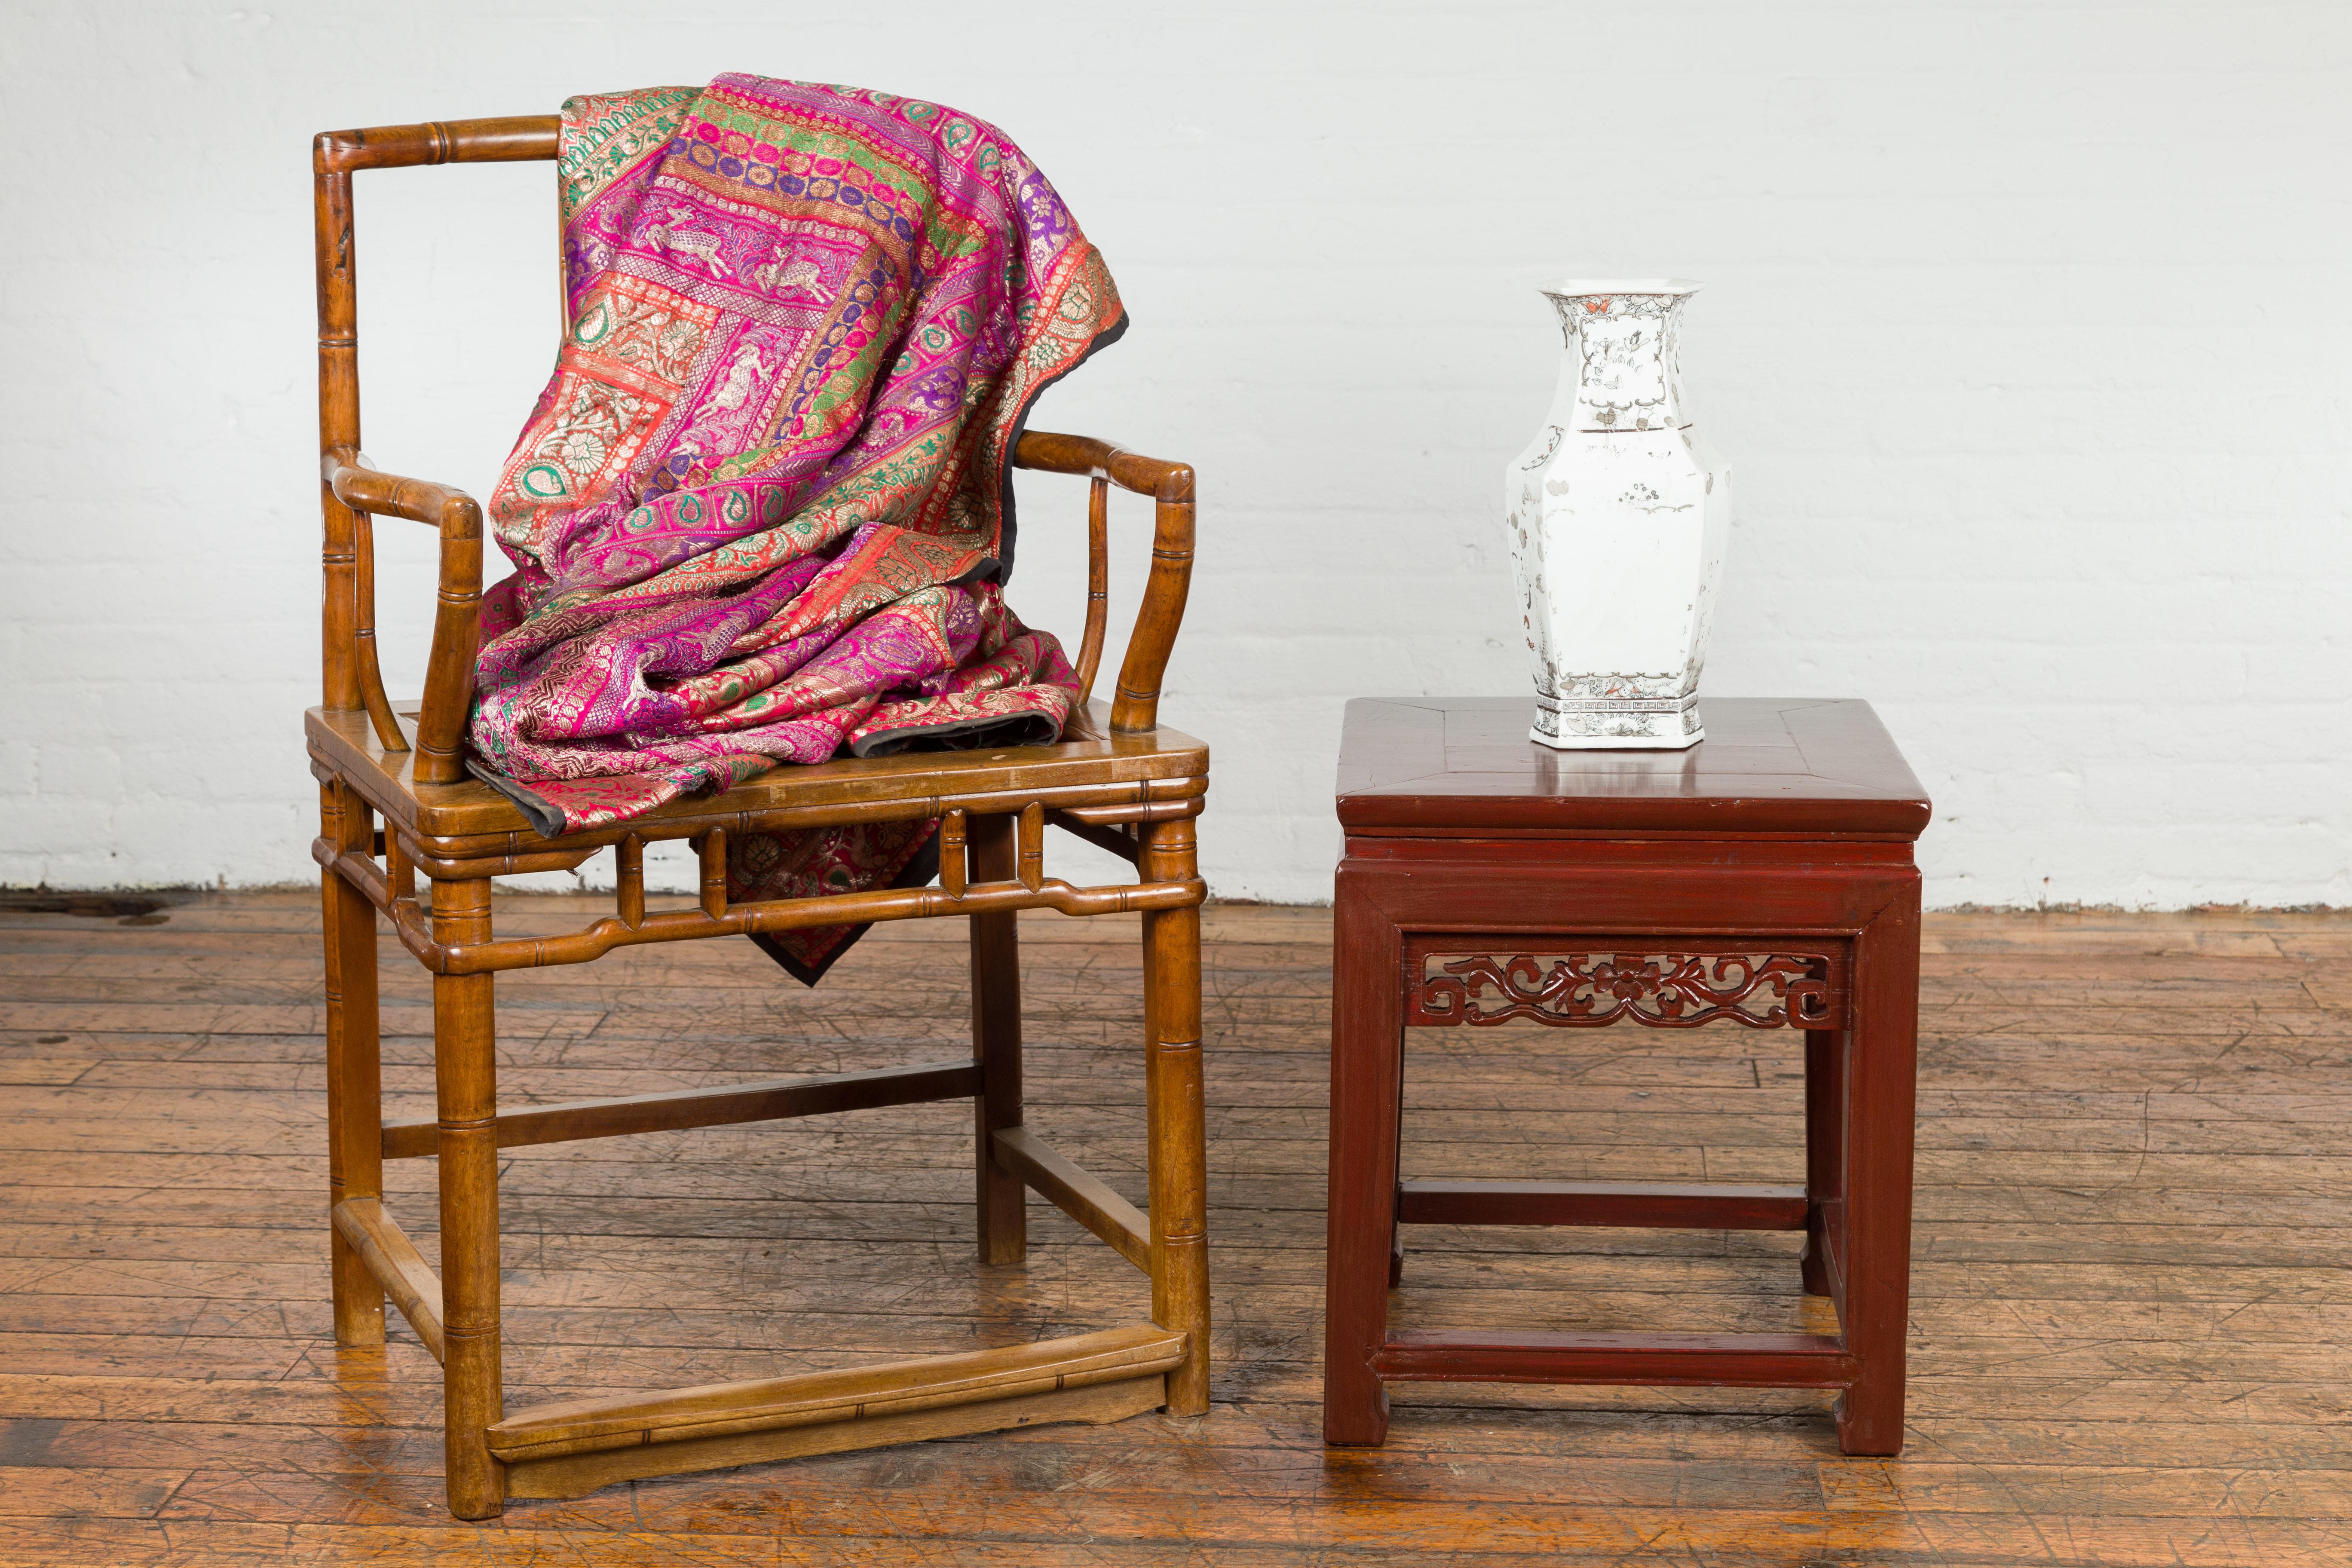 A Chinese late Qing Dynasty period small side table or stool from circa 1900 with reddish brown lacquer, waisted apron, carved frieze and horse hoof feet. A charming showcase of late Qing Dynasty craftsmanship, this petite Chinese side table or